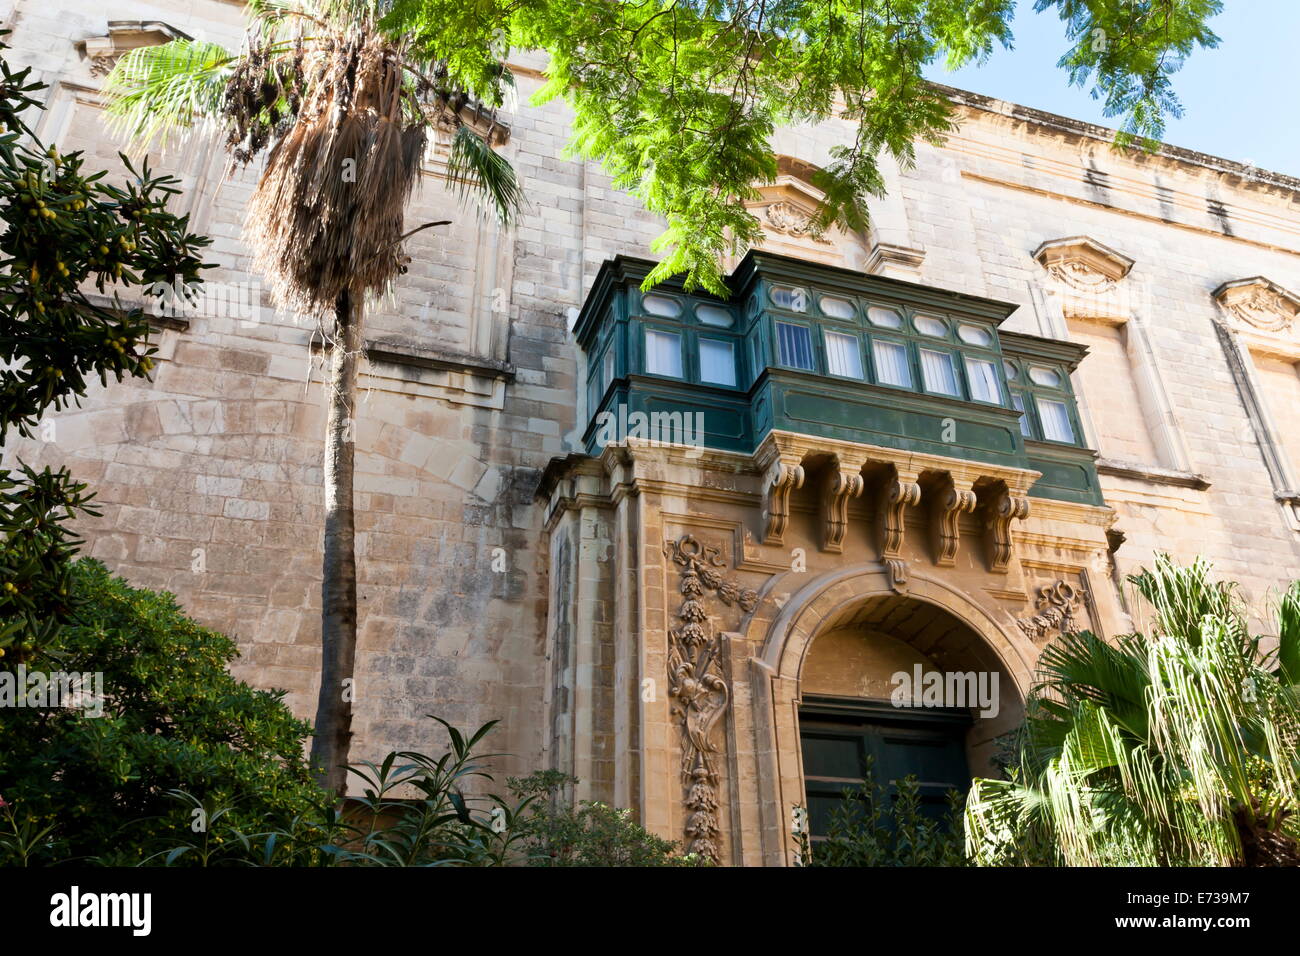 Malta Sotheby's International Realty - The Grand Masters Palace